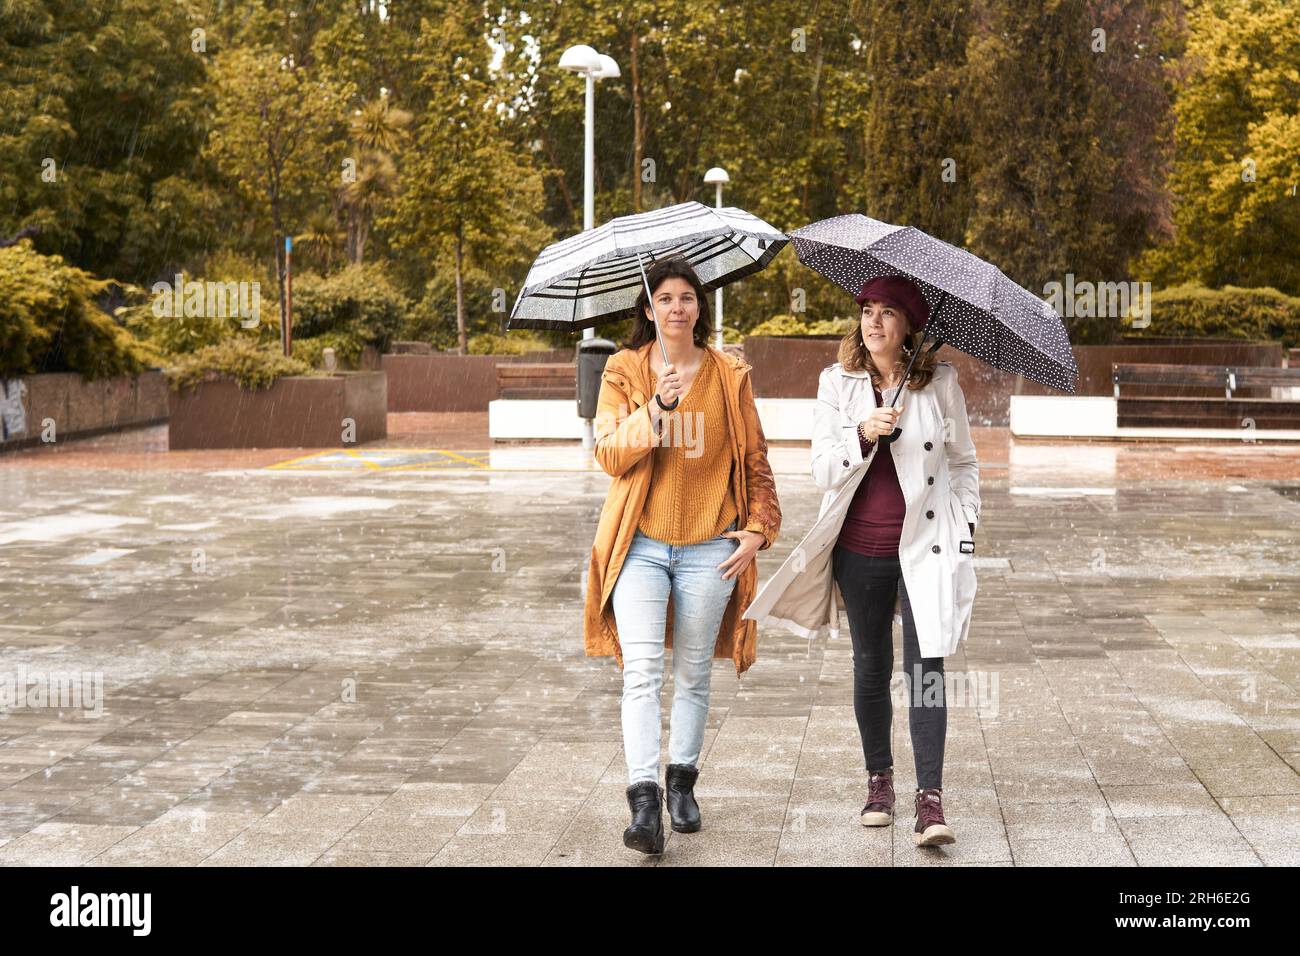 Middle age women walking under the rain with umbrellas Stock Photo